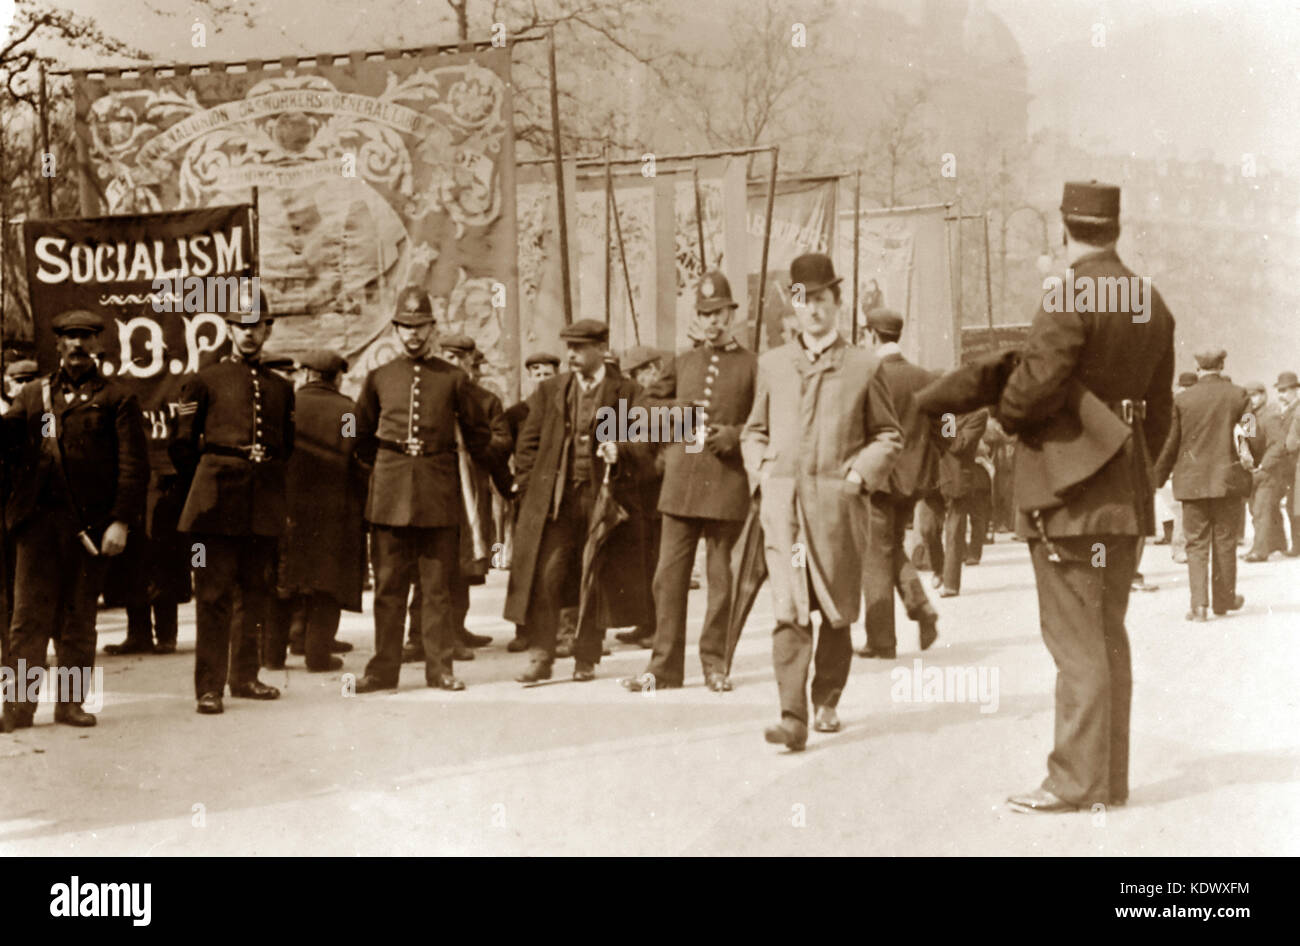 Socialist march, London, early 1900s Stock Photo